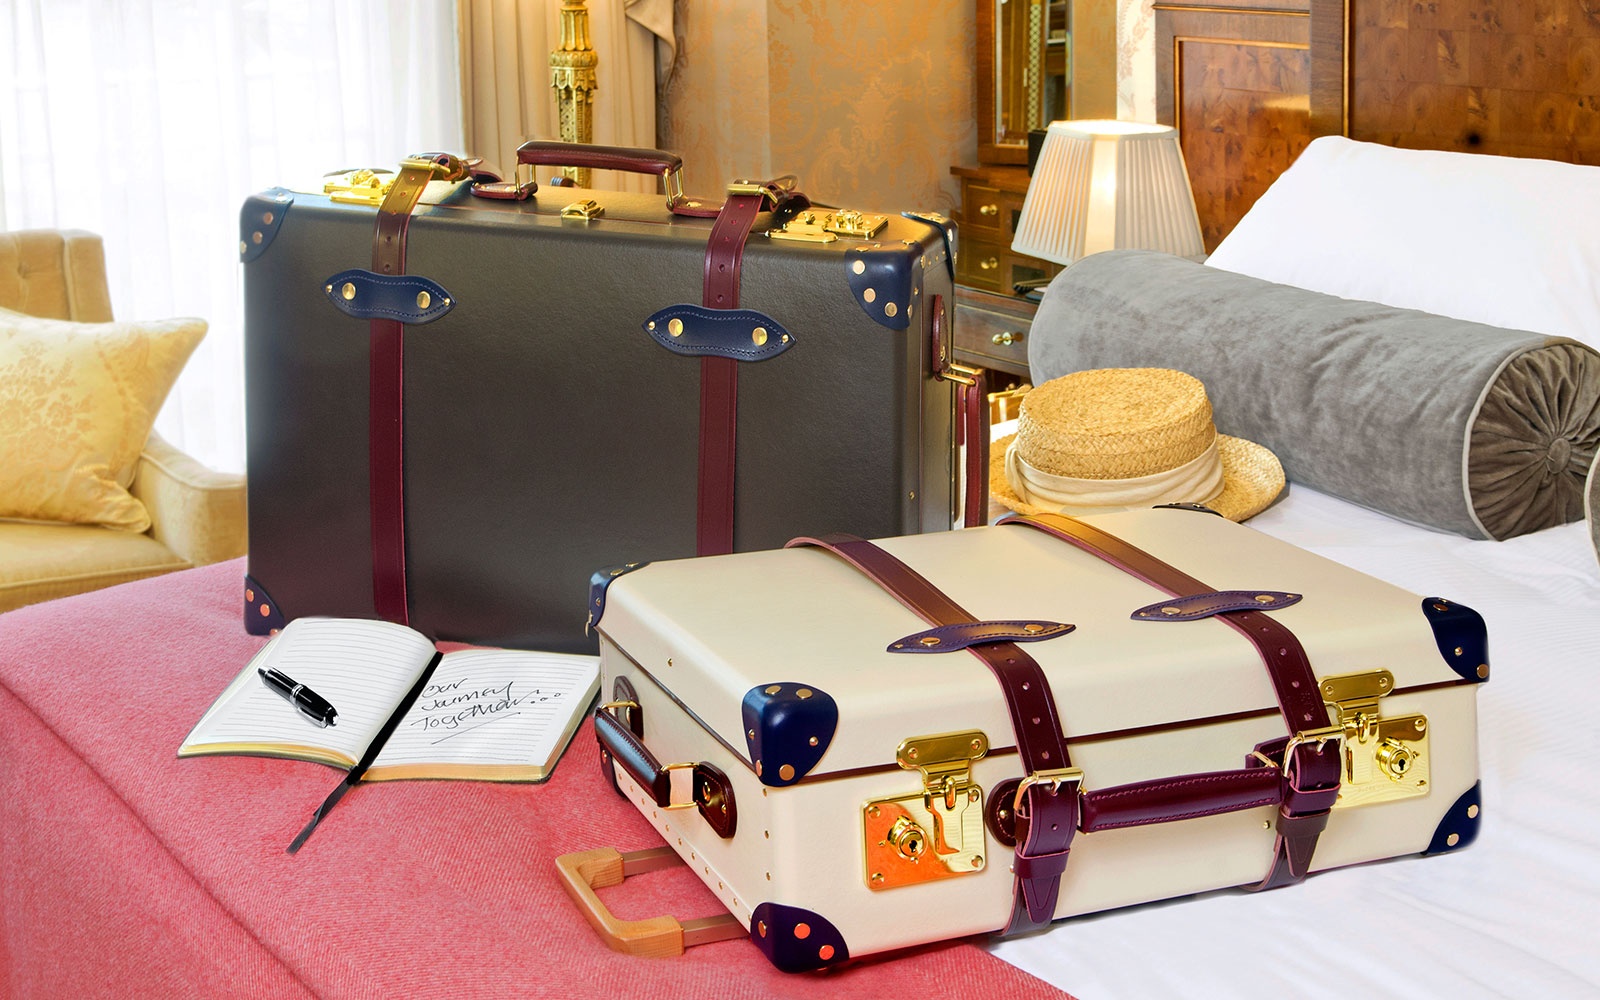 Luggage set from Globe-Trotter's collaboration with The Goring Hotel